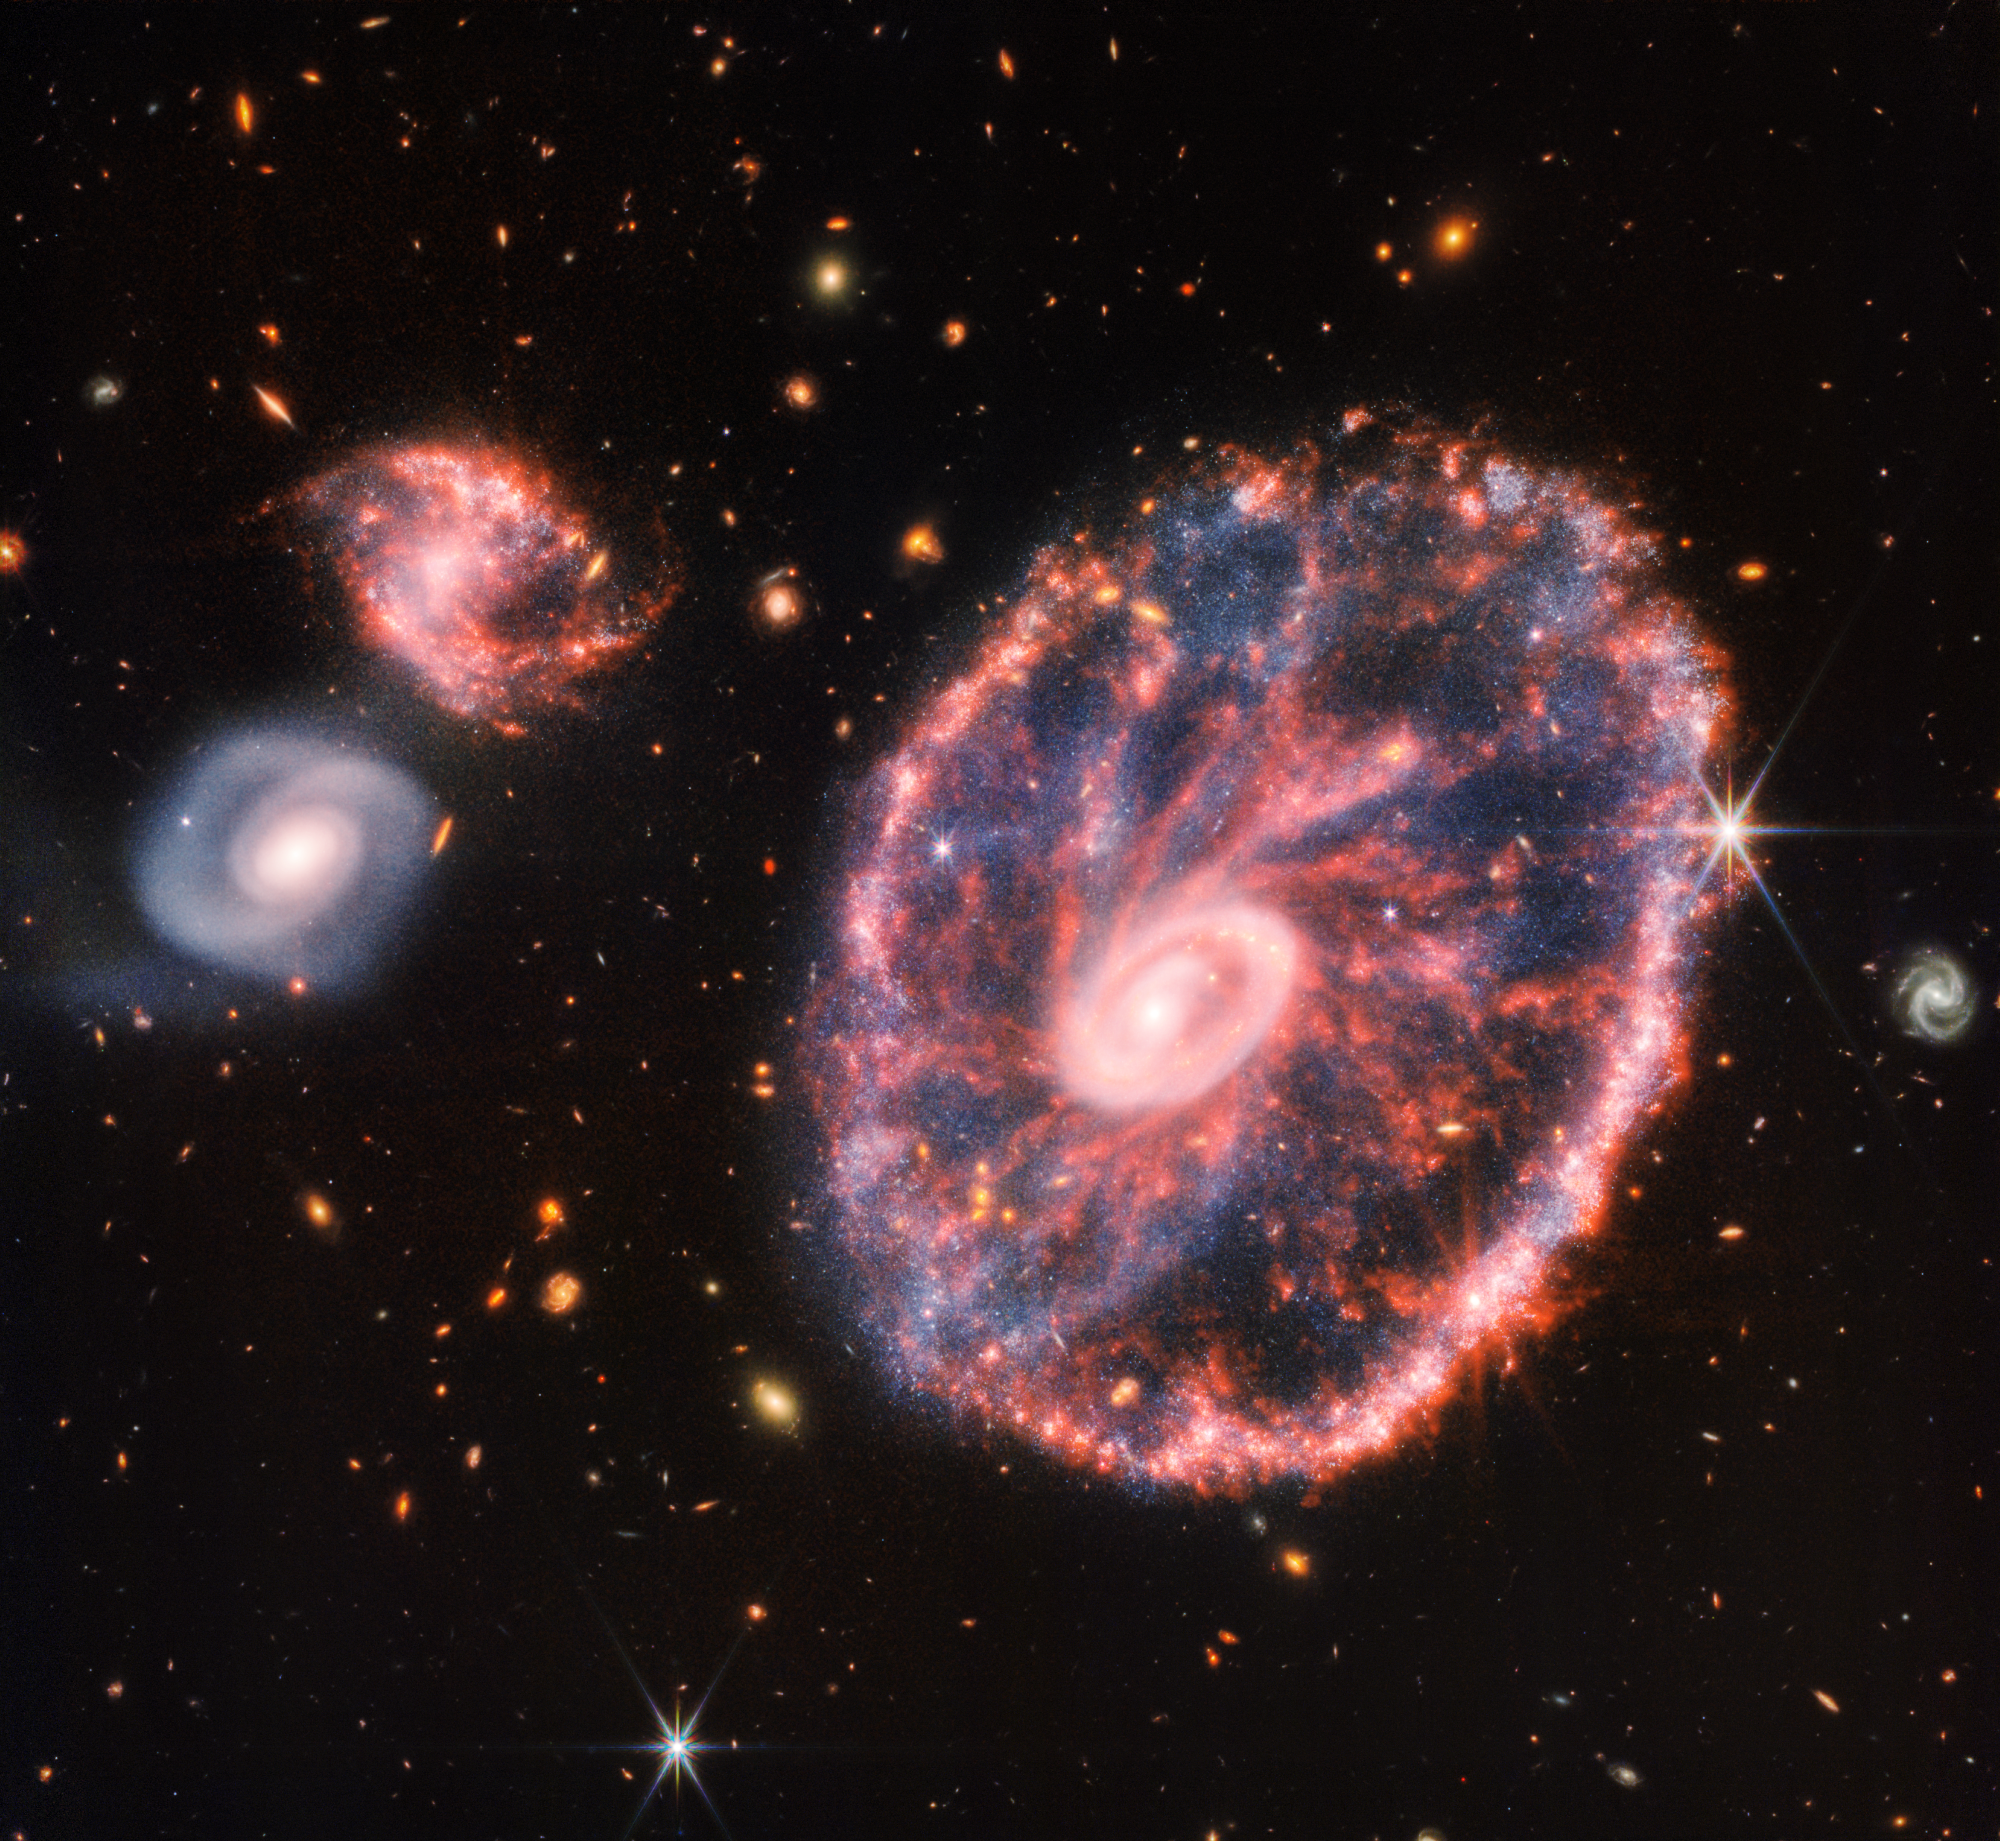 A large pink, speckled galaxy resembling a wheel with a small, inner oval, with dusty blue in between on the right, with two smaller spiral galaxies about the same size to the left against a black background.